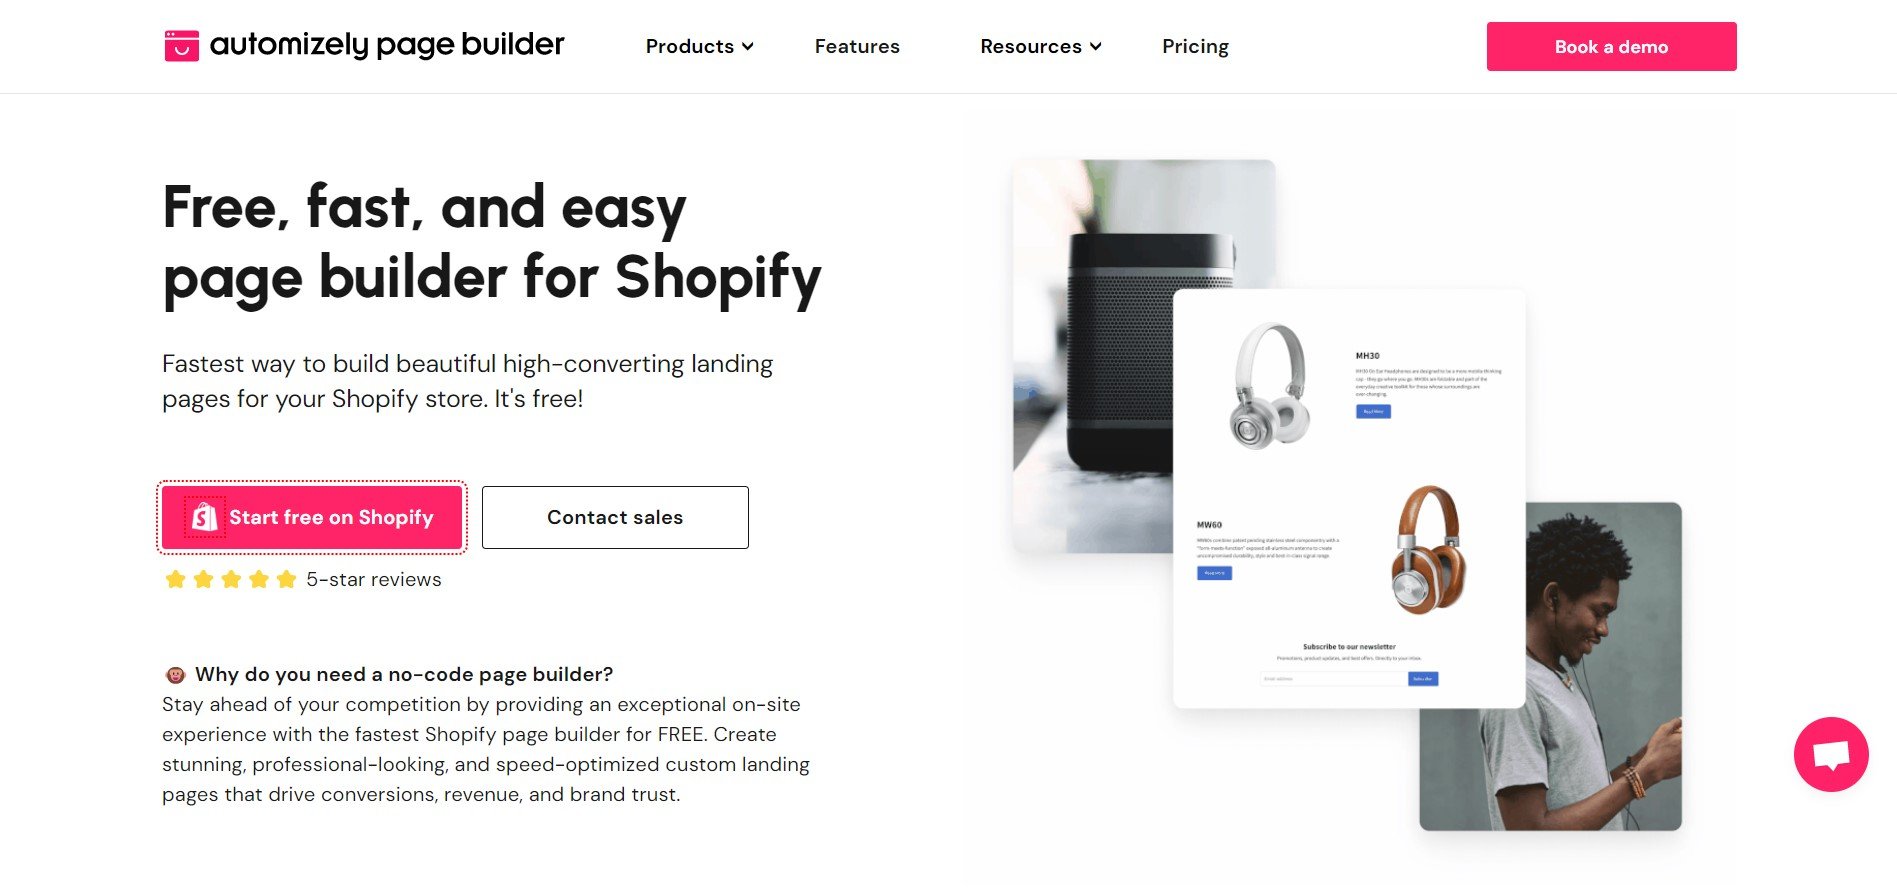 Best Shopify Page Builder Apps: Automizely